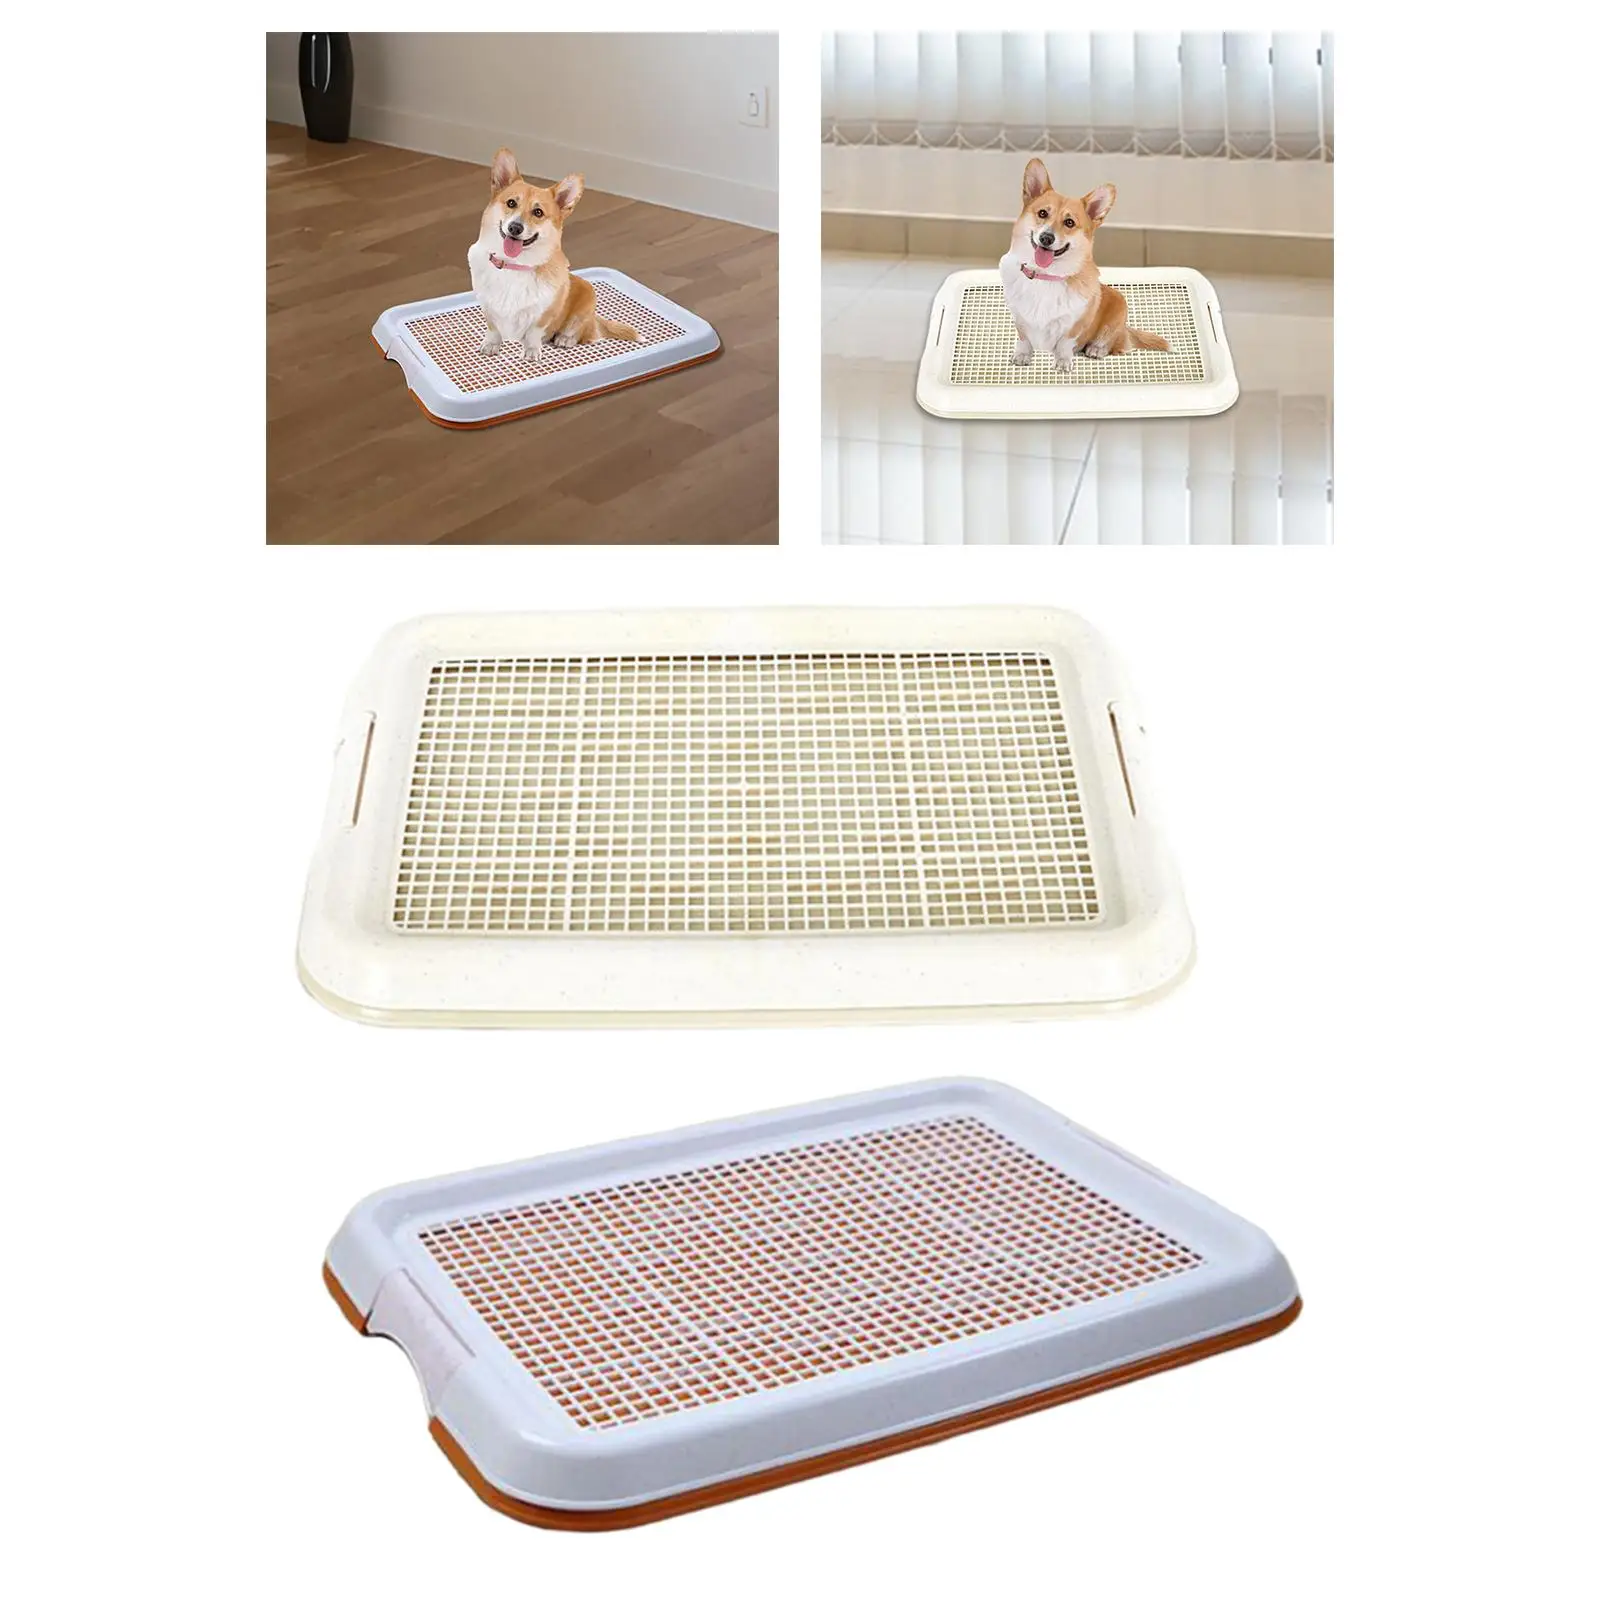 Dog Potty Toilet Training Tray, Pet Indoor Pads Holder, Indoor Potty Trainer for